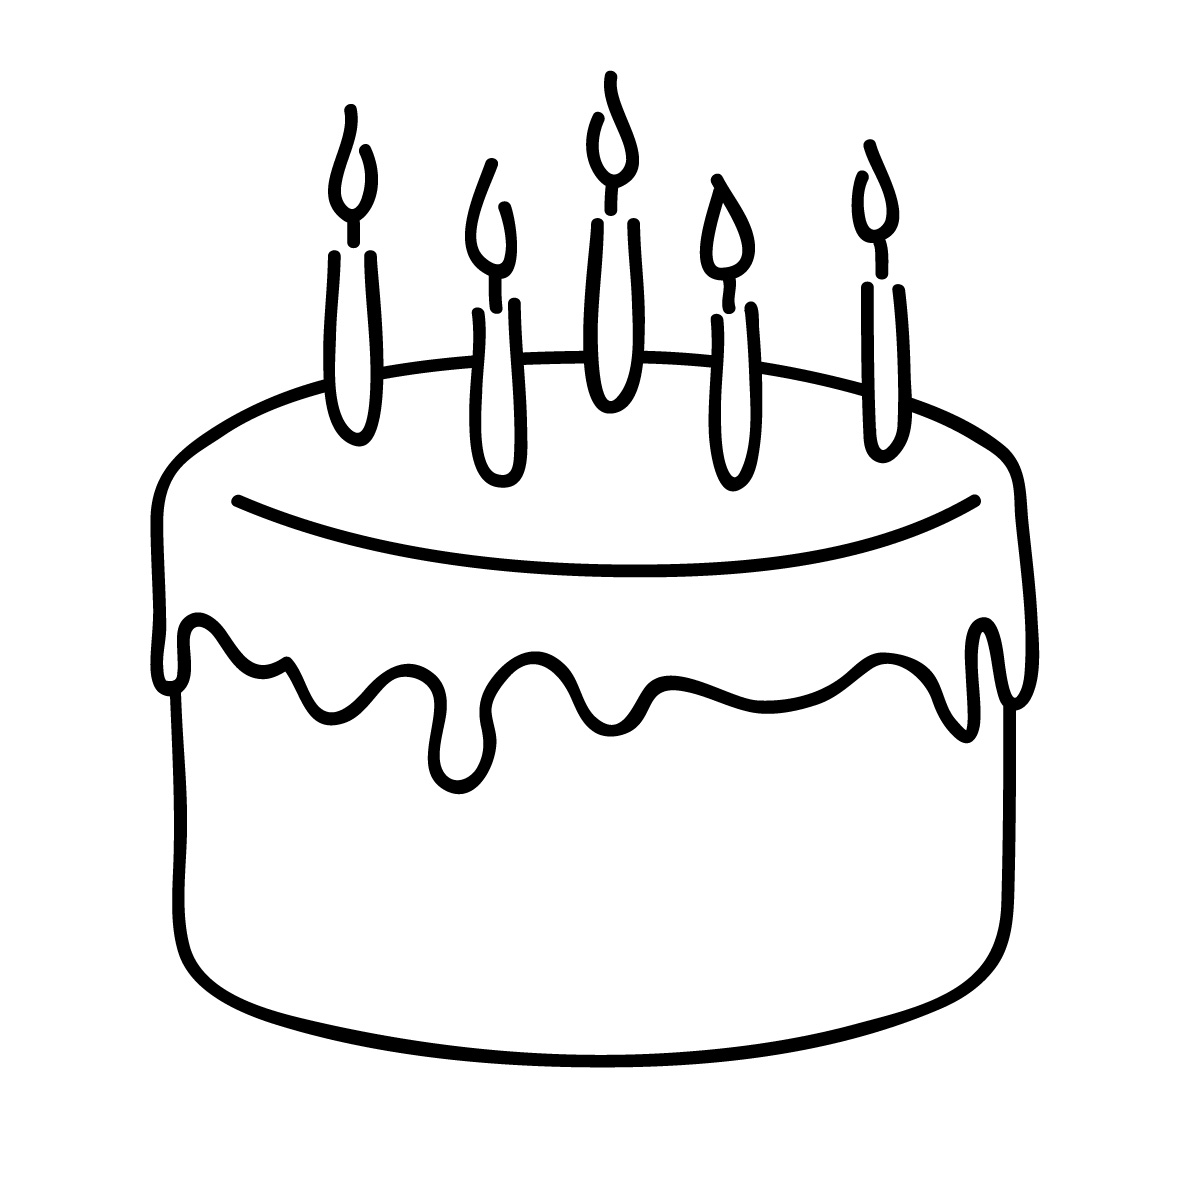 Birthday Cake Images Free - ClipArt Best